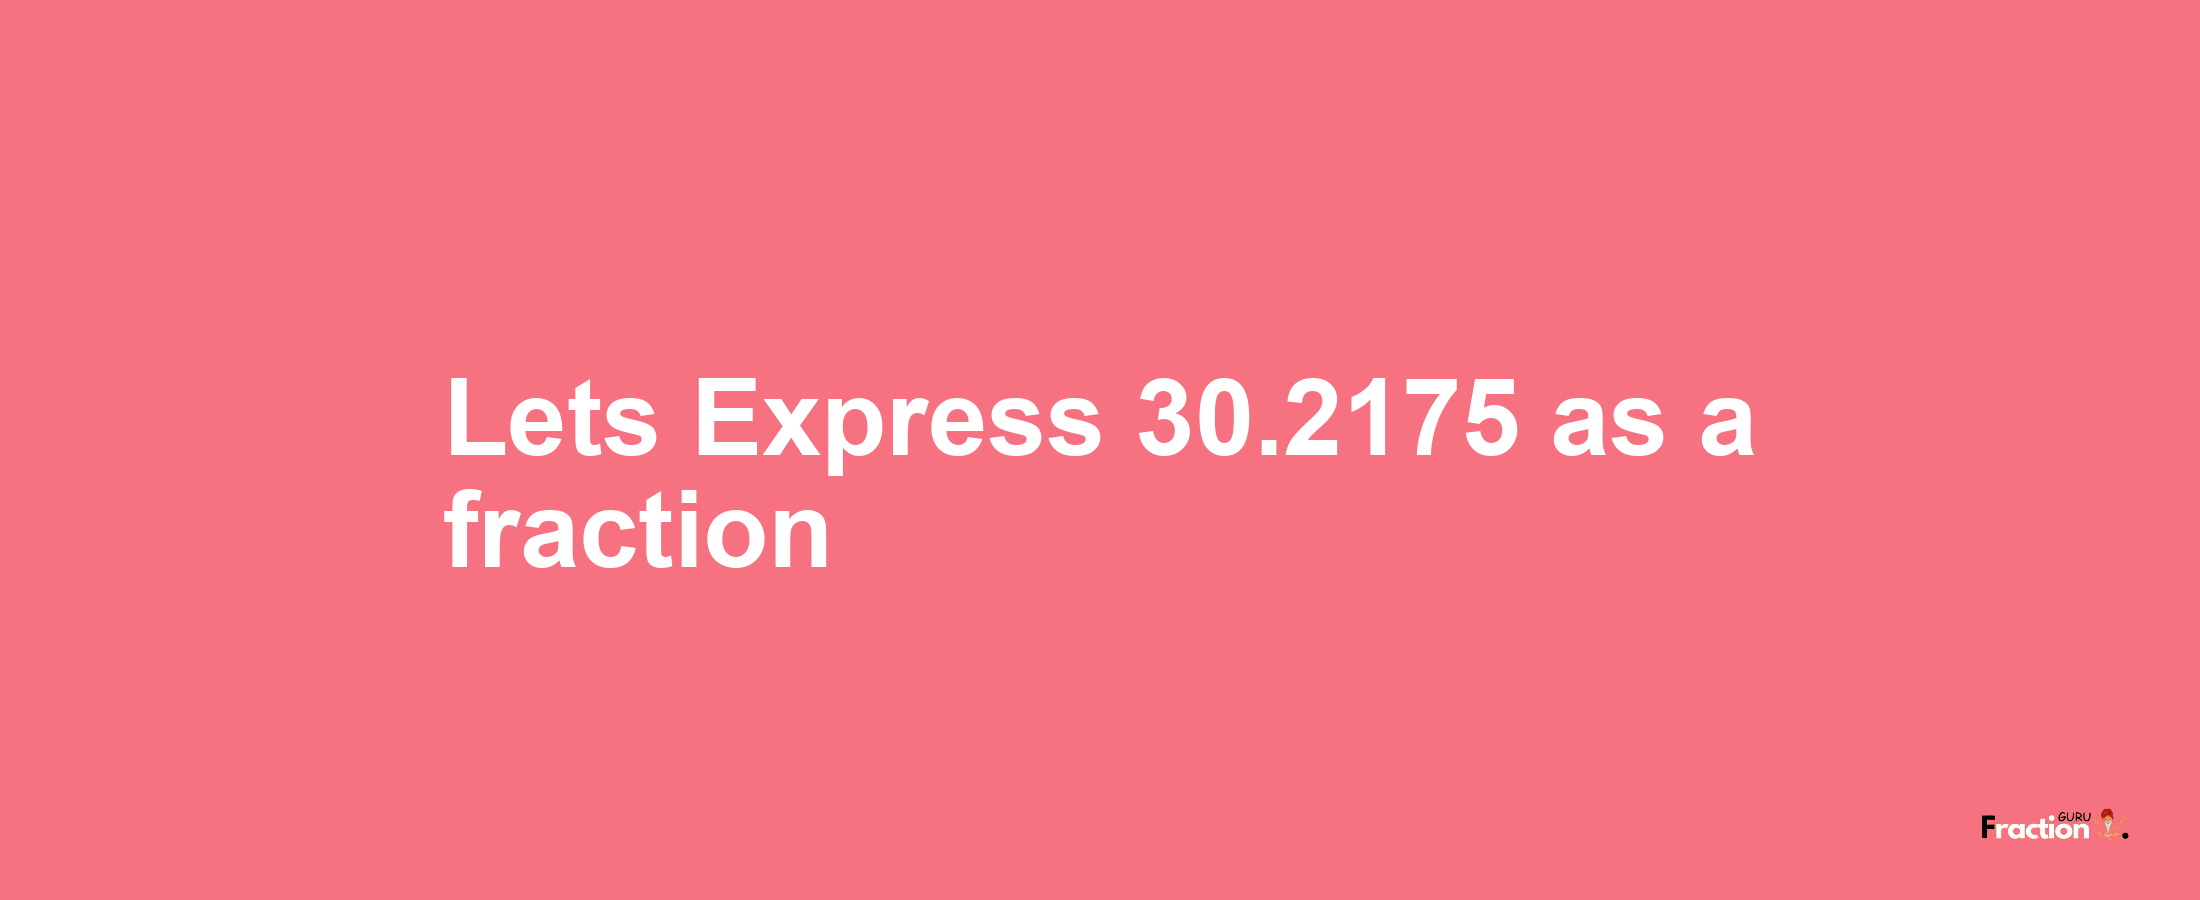 Lets Express 30.2175 as afraction